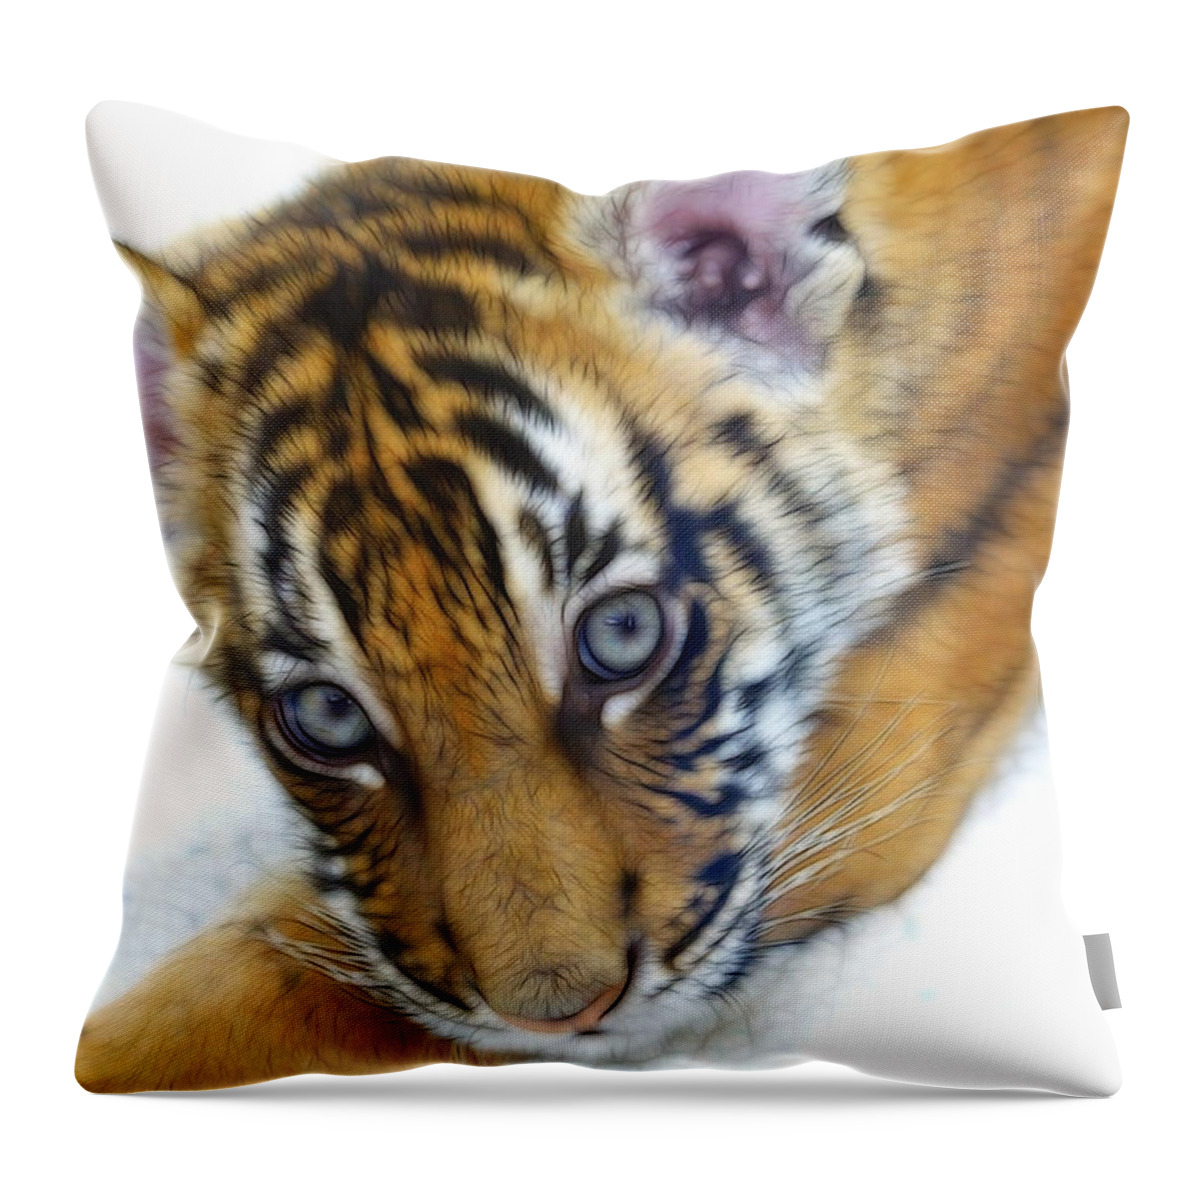 Baby Tiger Throw Pillow featuring the photograph Baby Tiger by Steve McKinzie